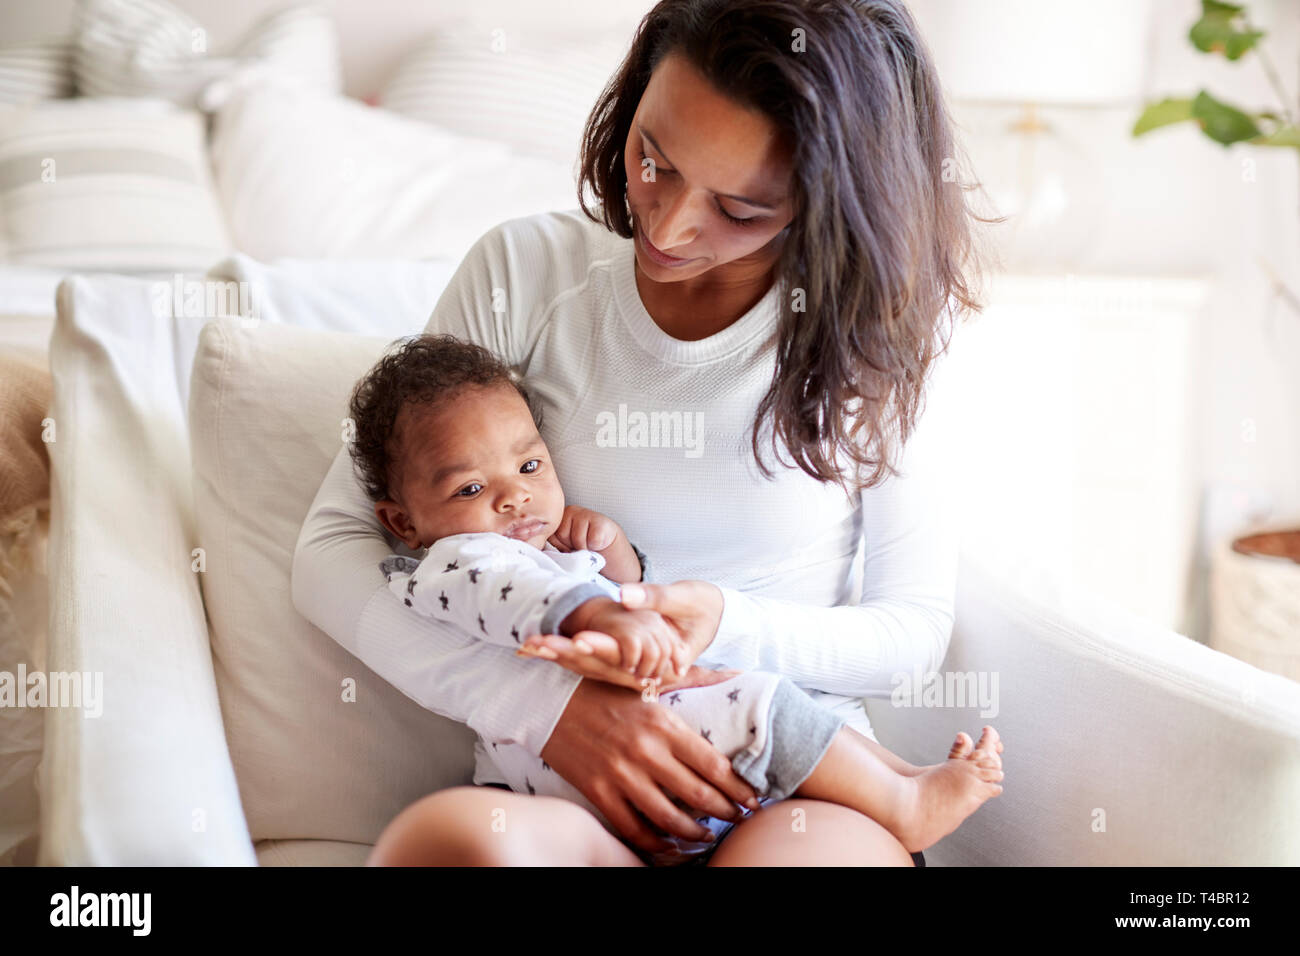 Young adult mother sitting in an armchair in her bedroom, holding her three month old baby son in her arms and looking down at him, close up Stock Photo